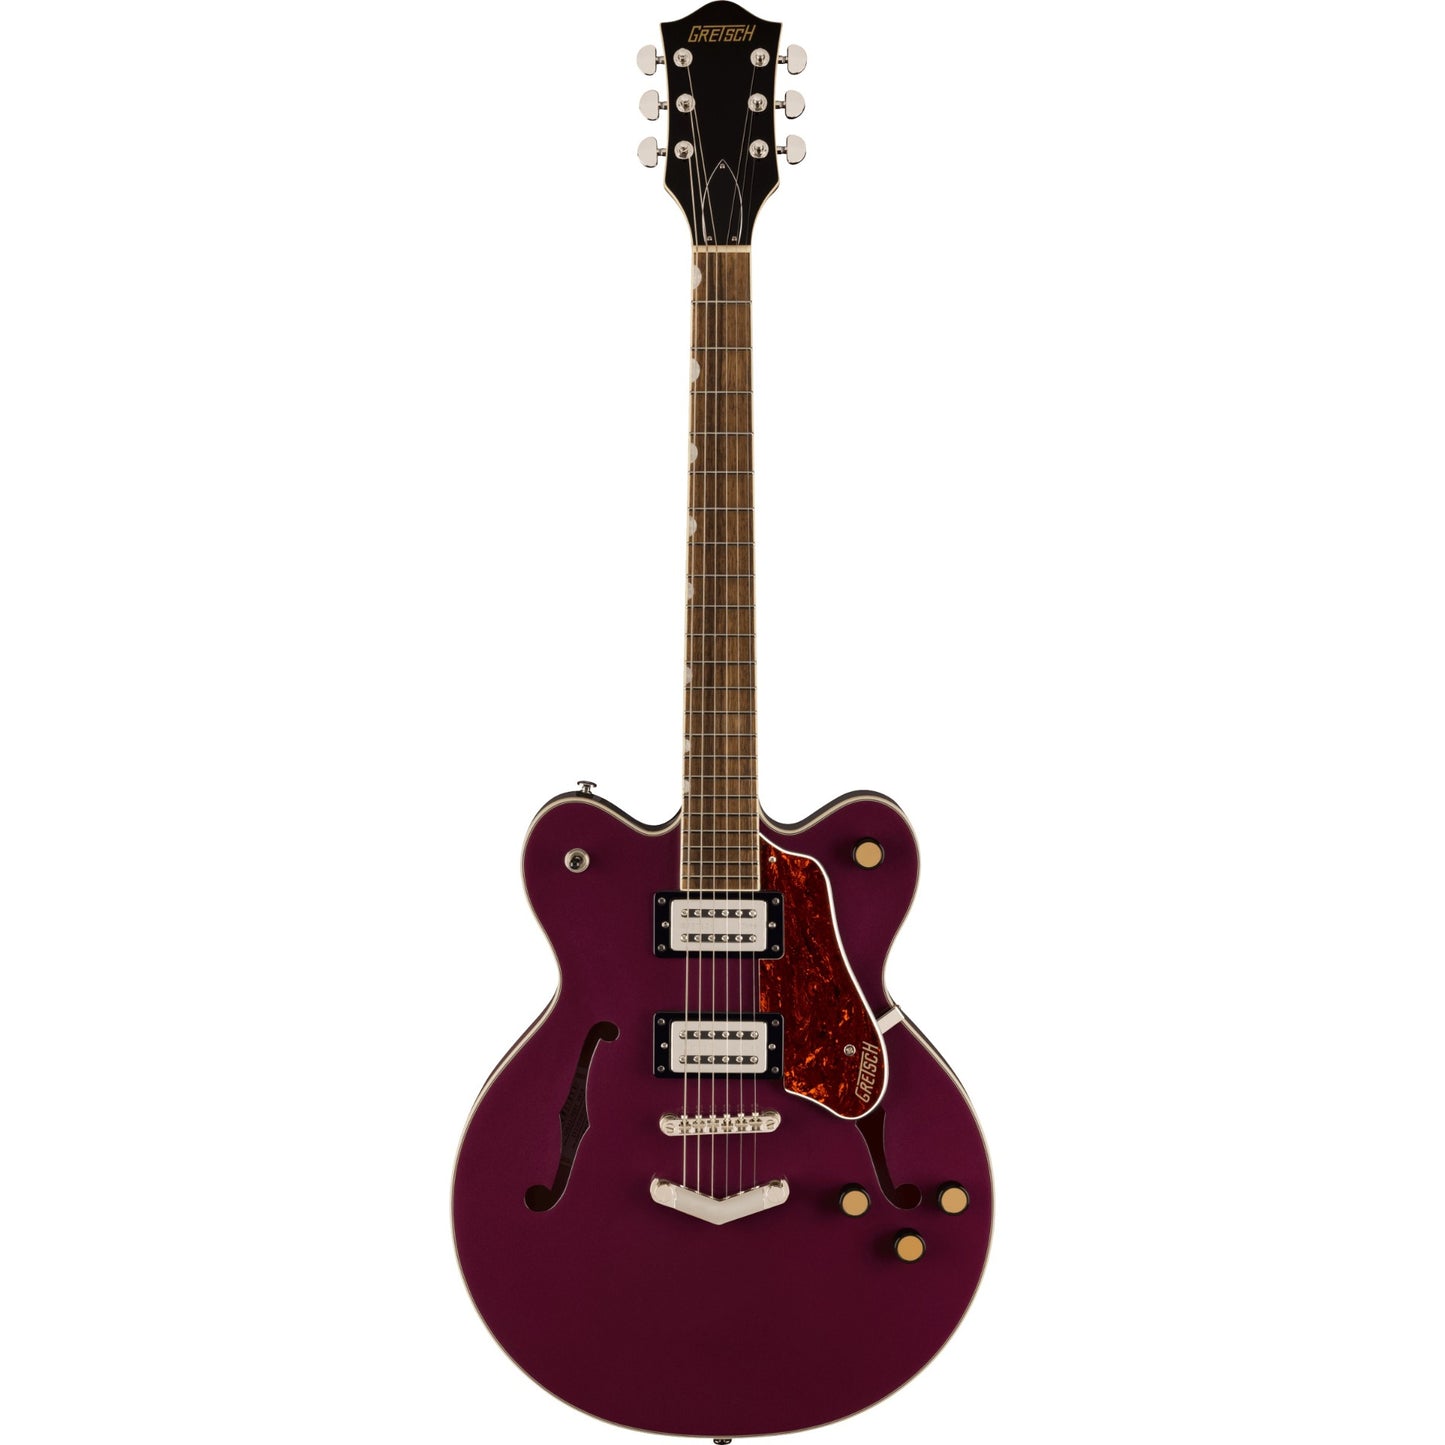 Gretsch G2622 Streamliner™ Center Block Double-Cut Electric Guitar w/ V-Stoptail, Burnt Orchid